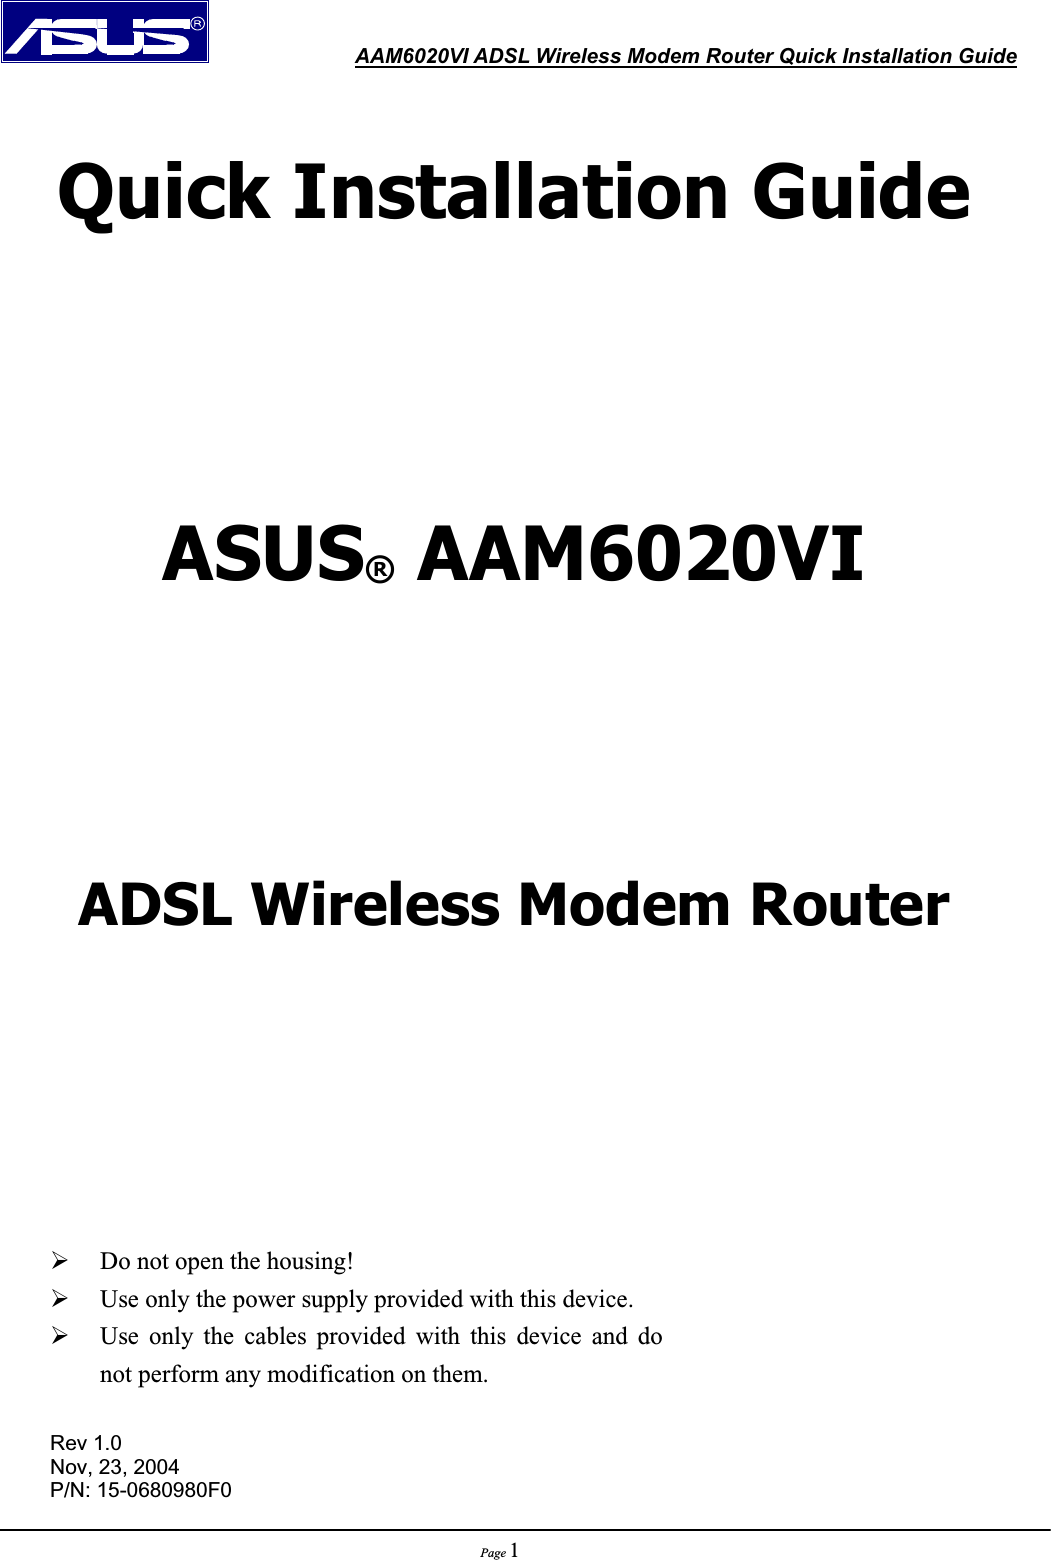               AAM6020VI ADSL Wireless Modem Router Quick Installation GuidePage 1Quick Installation Guide ASUS® AAM6020VI ADSL Wireless Modem Router ¾Do not open the housing! ¾Use only the power supply provided with this device. ¾Use only the cables provided with this device and do not perform any modification on them. Rev 1.0 Nov, 23, 2004 P/N: 15-0680980F0 